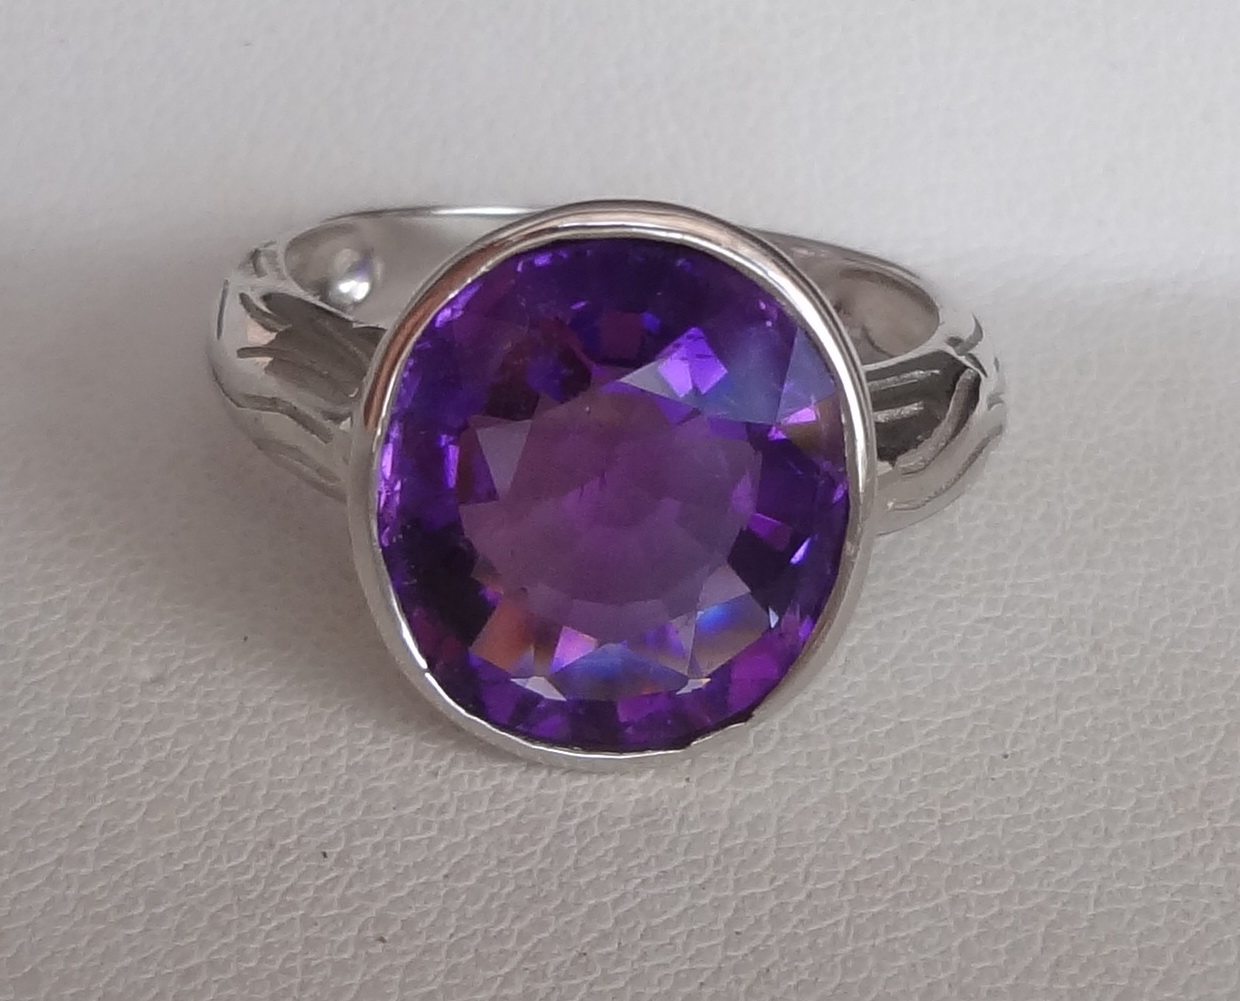 Latest Gemstones in our Stock: Amethyst Sterling Silver Ring